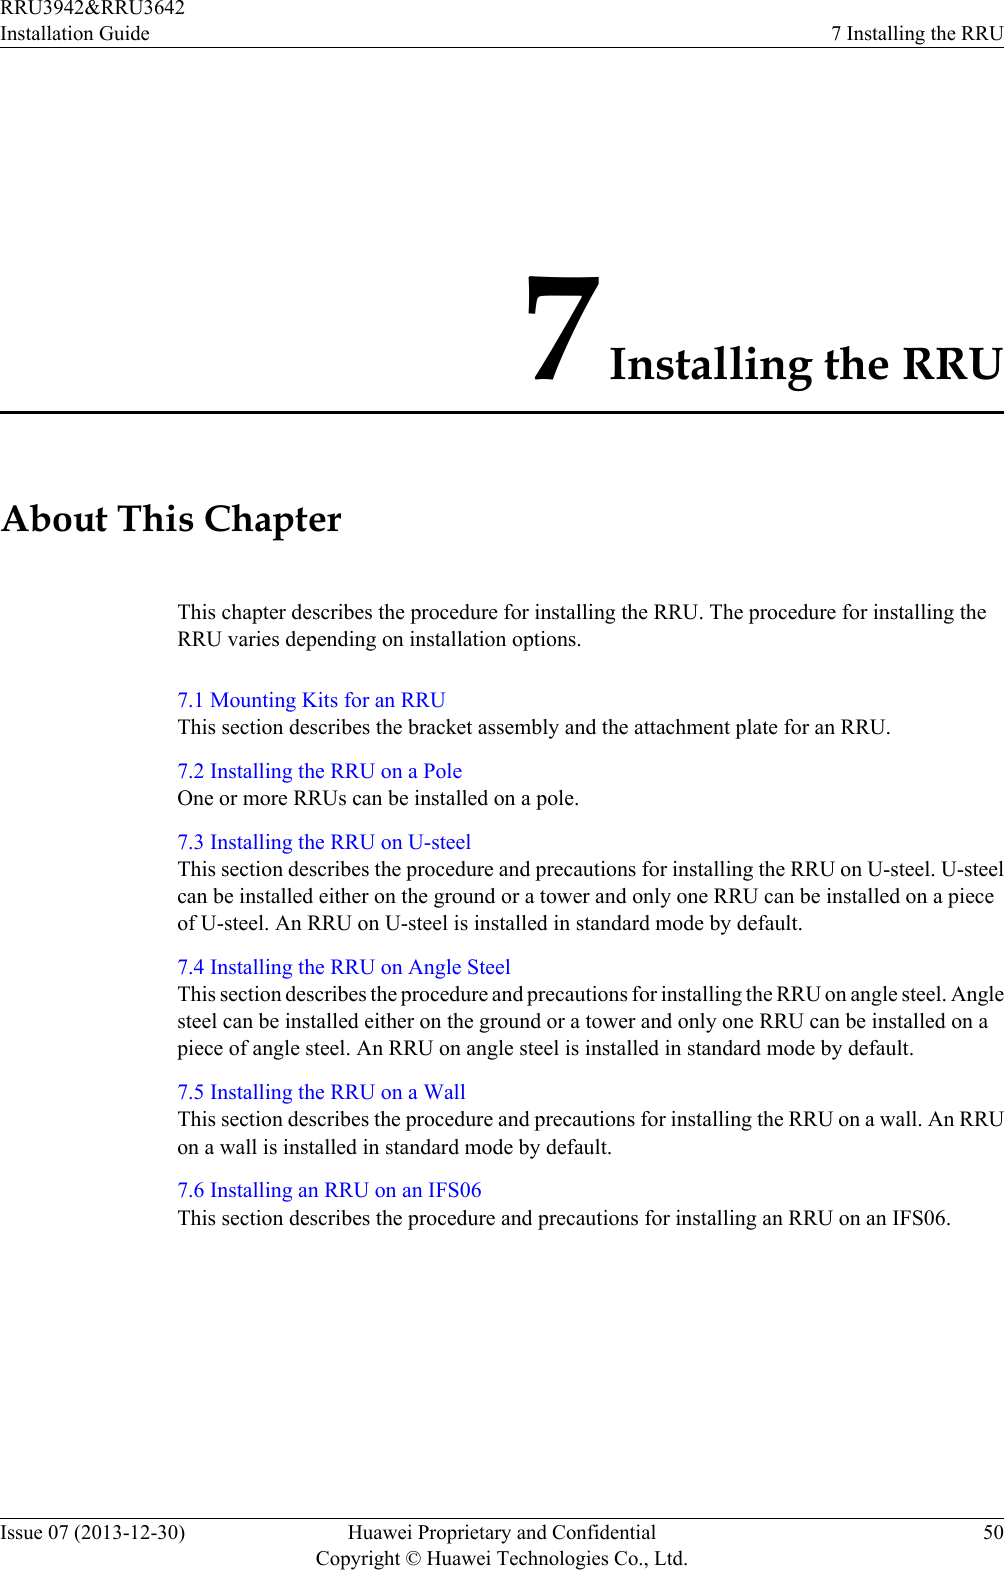 7 Installing the RRUAbout This ChapterThis chapter describes the procedure for installing the RRU. The procedure for installing theRRU varies depending on installation options.7.1 Mounting Kits for an RRUThis section describes the bracket assembly and the attachment plate for an RRU.7.2 Installing the RRU on a PoleOne or more RRUs can be installed on a pole.7.3 Installing the RRU on U-steelThis section describes the procedure and precautions for installing the RRU on U-steel. U-steelcan be installed either on the ground or a tower and only one RRU can be installed on a pieceof U-steel. An RRU on U-steel is installed in standard mode by default.7.4 Installing the RRU on Angle SteelThis section describes the procedure and precautions for installing the RRU on angle steel. Anglesteel can be installed either on the ground or a tower and only one RRU can be installed on apiece of angle steel. An RRU on angle steel is installed in standard mode by default.7.5 Installing the RRU on a WallThis section describes the procedure and precautions for installing the RRU on a wall. An RRUon a wall is installed in standard mode by default.7.6 Installing an RRU on an IFS06This section describes the procedure and precautions for installing an RRU on an IFS06.RRU3942&amp;RRU3642Installation Guide 7 Installing the RRUIssue 07 (2013-12-30) Huawei Proprietary and ConfidentialCopyright © Huawei Technologies Co., Ltd.50